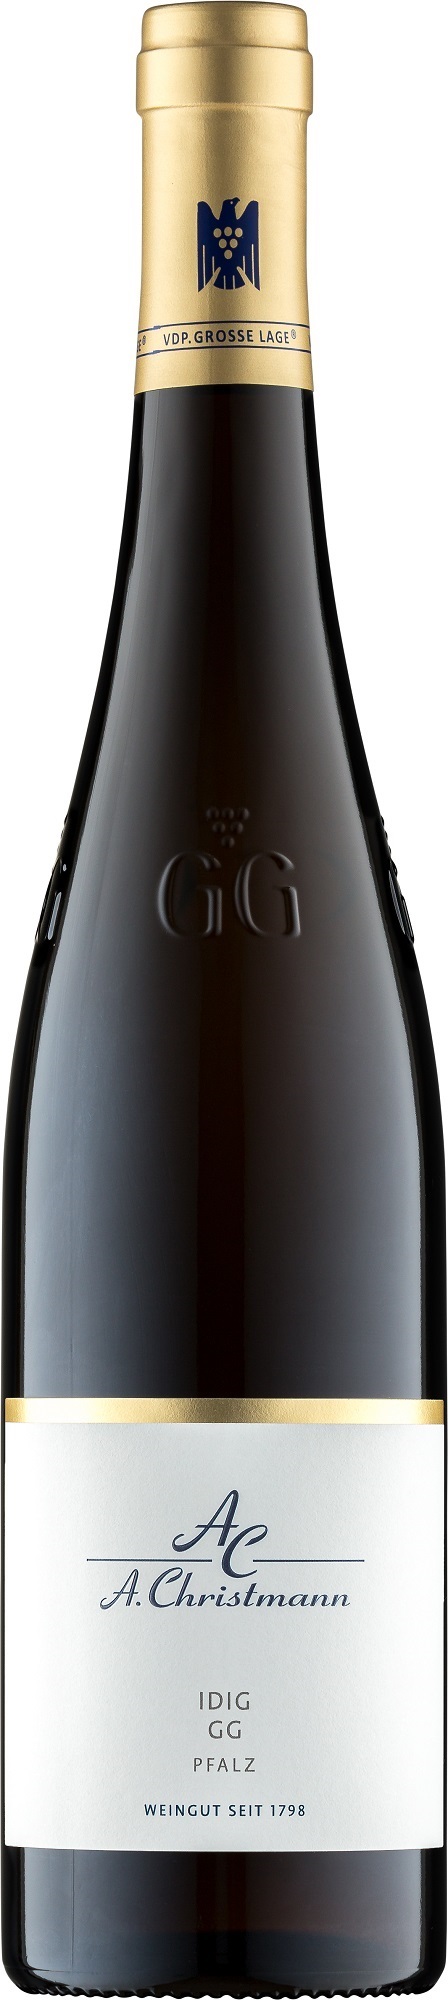 Idig Riesling GG Magnum